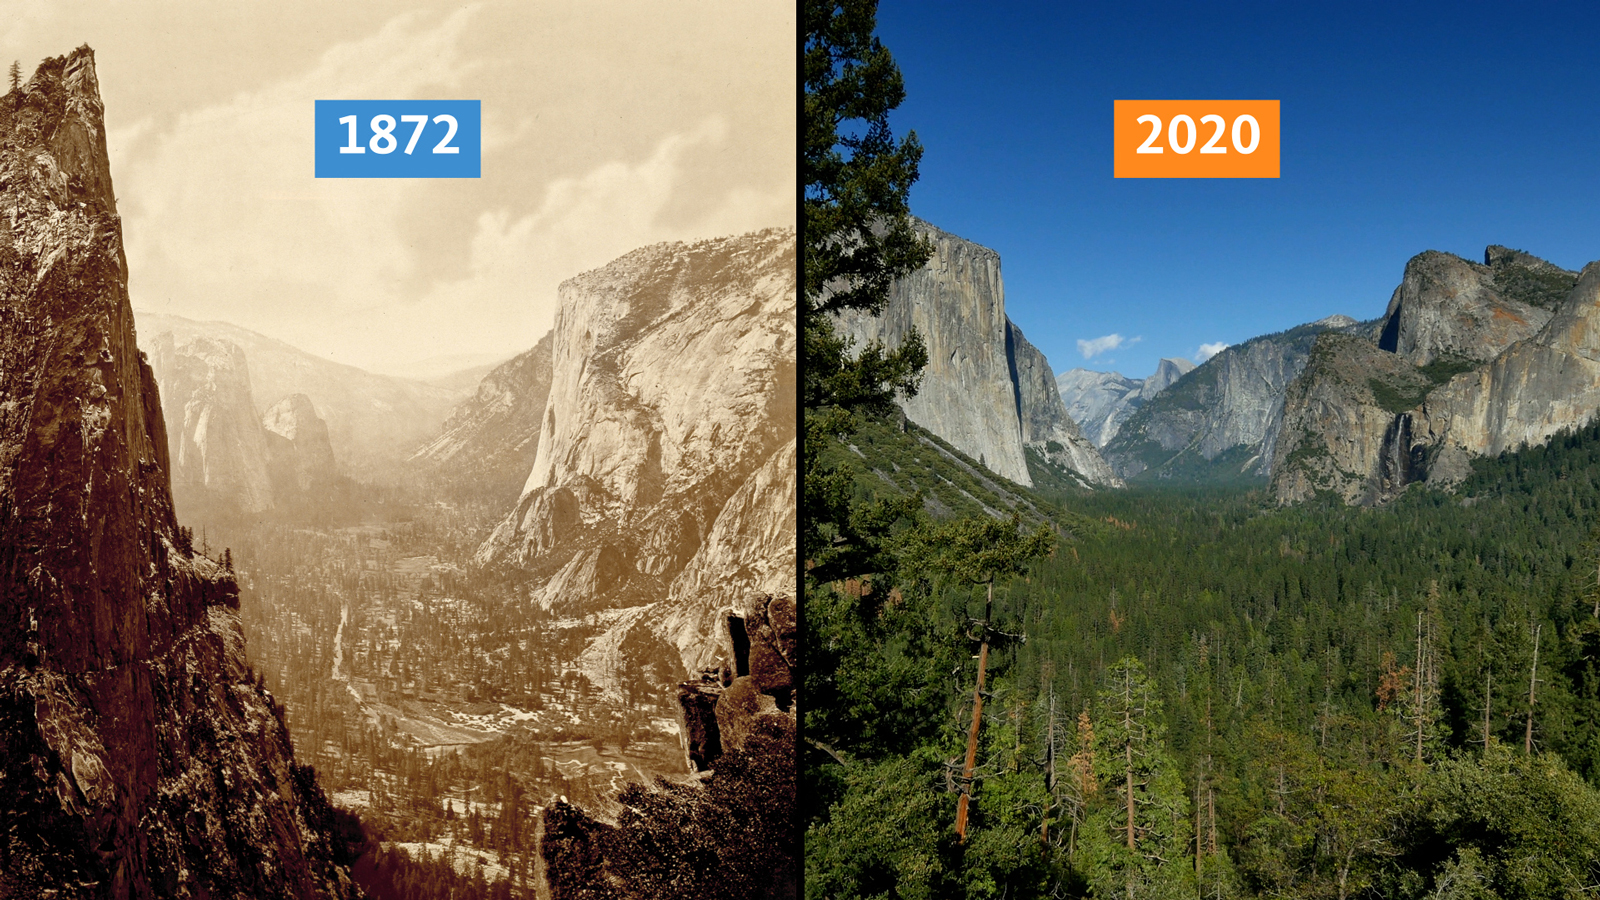 A side by side view of Yosemite 1872 vs 2020; trees are much sparser in 1872